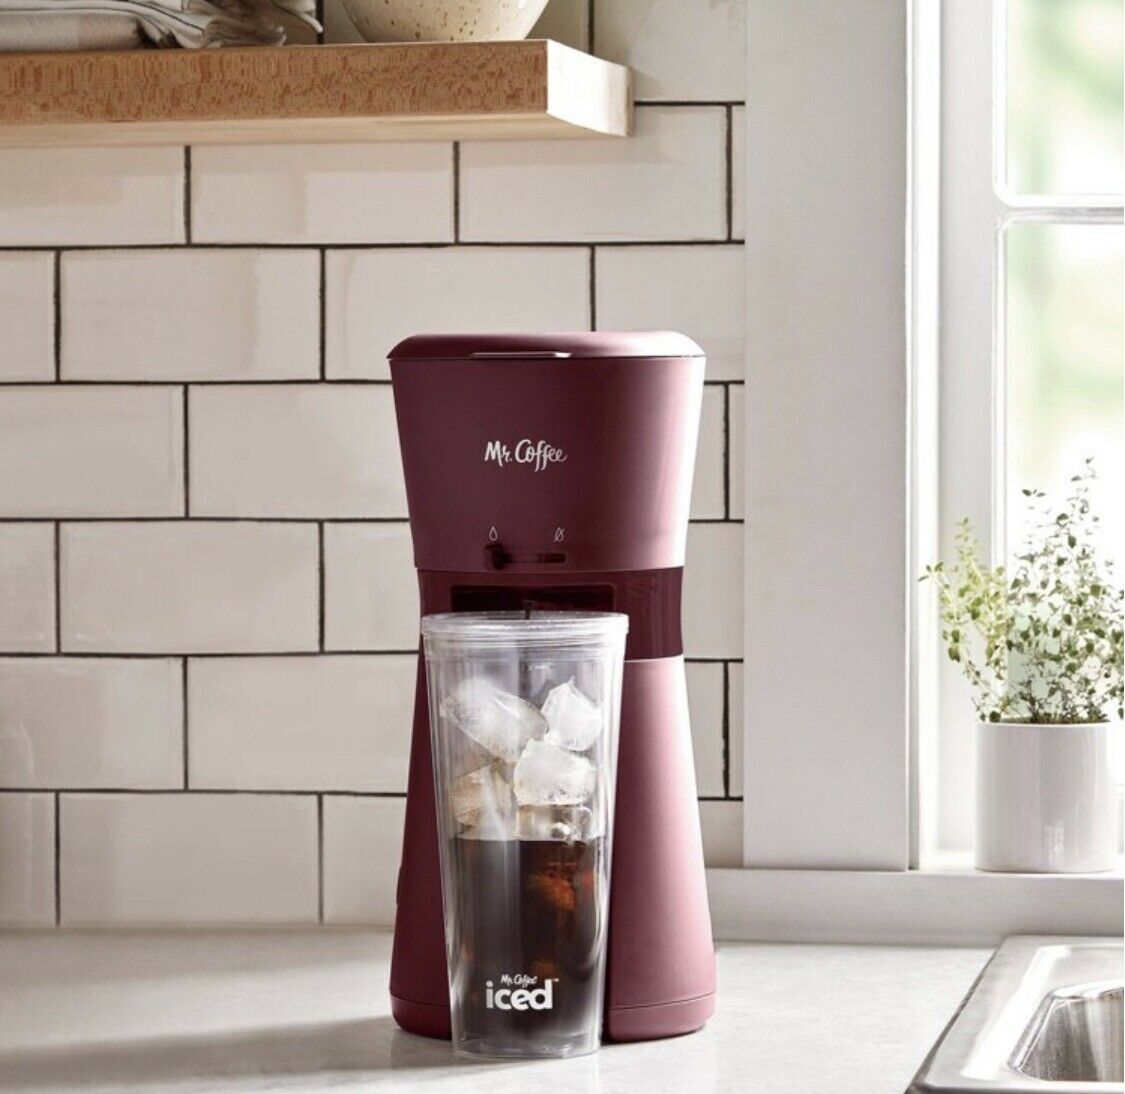 Mr. Coffee® Iced™ Coffee Maker with Reusable Tumbler and Coffee Filter, Burgundy